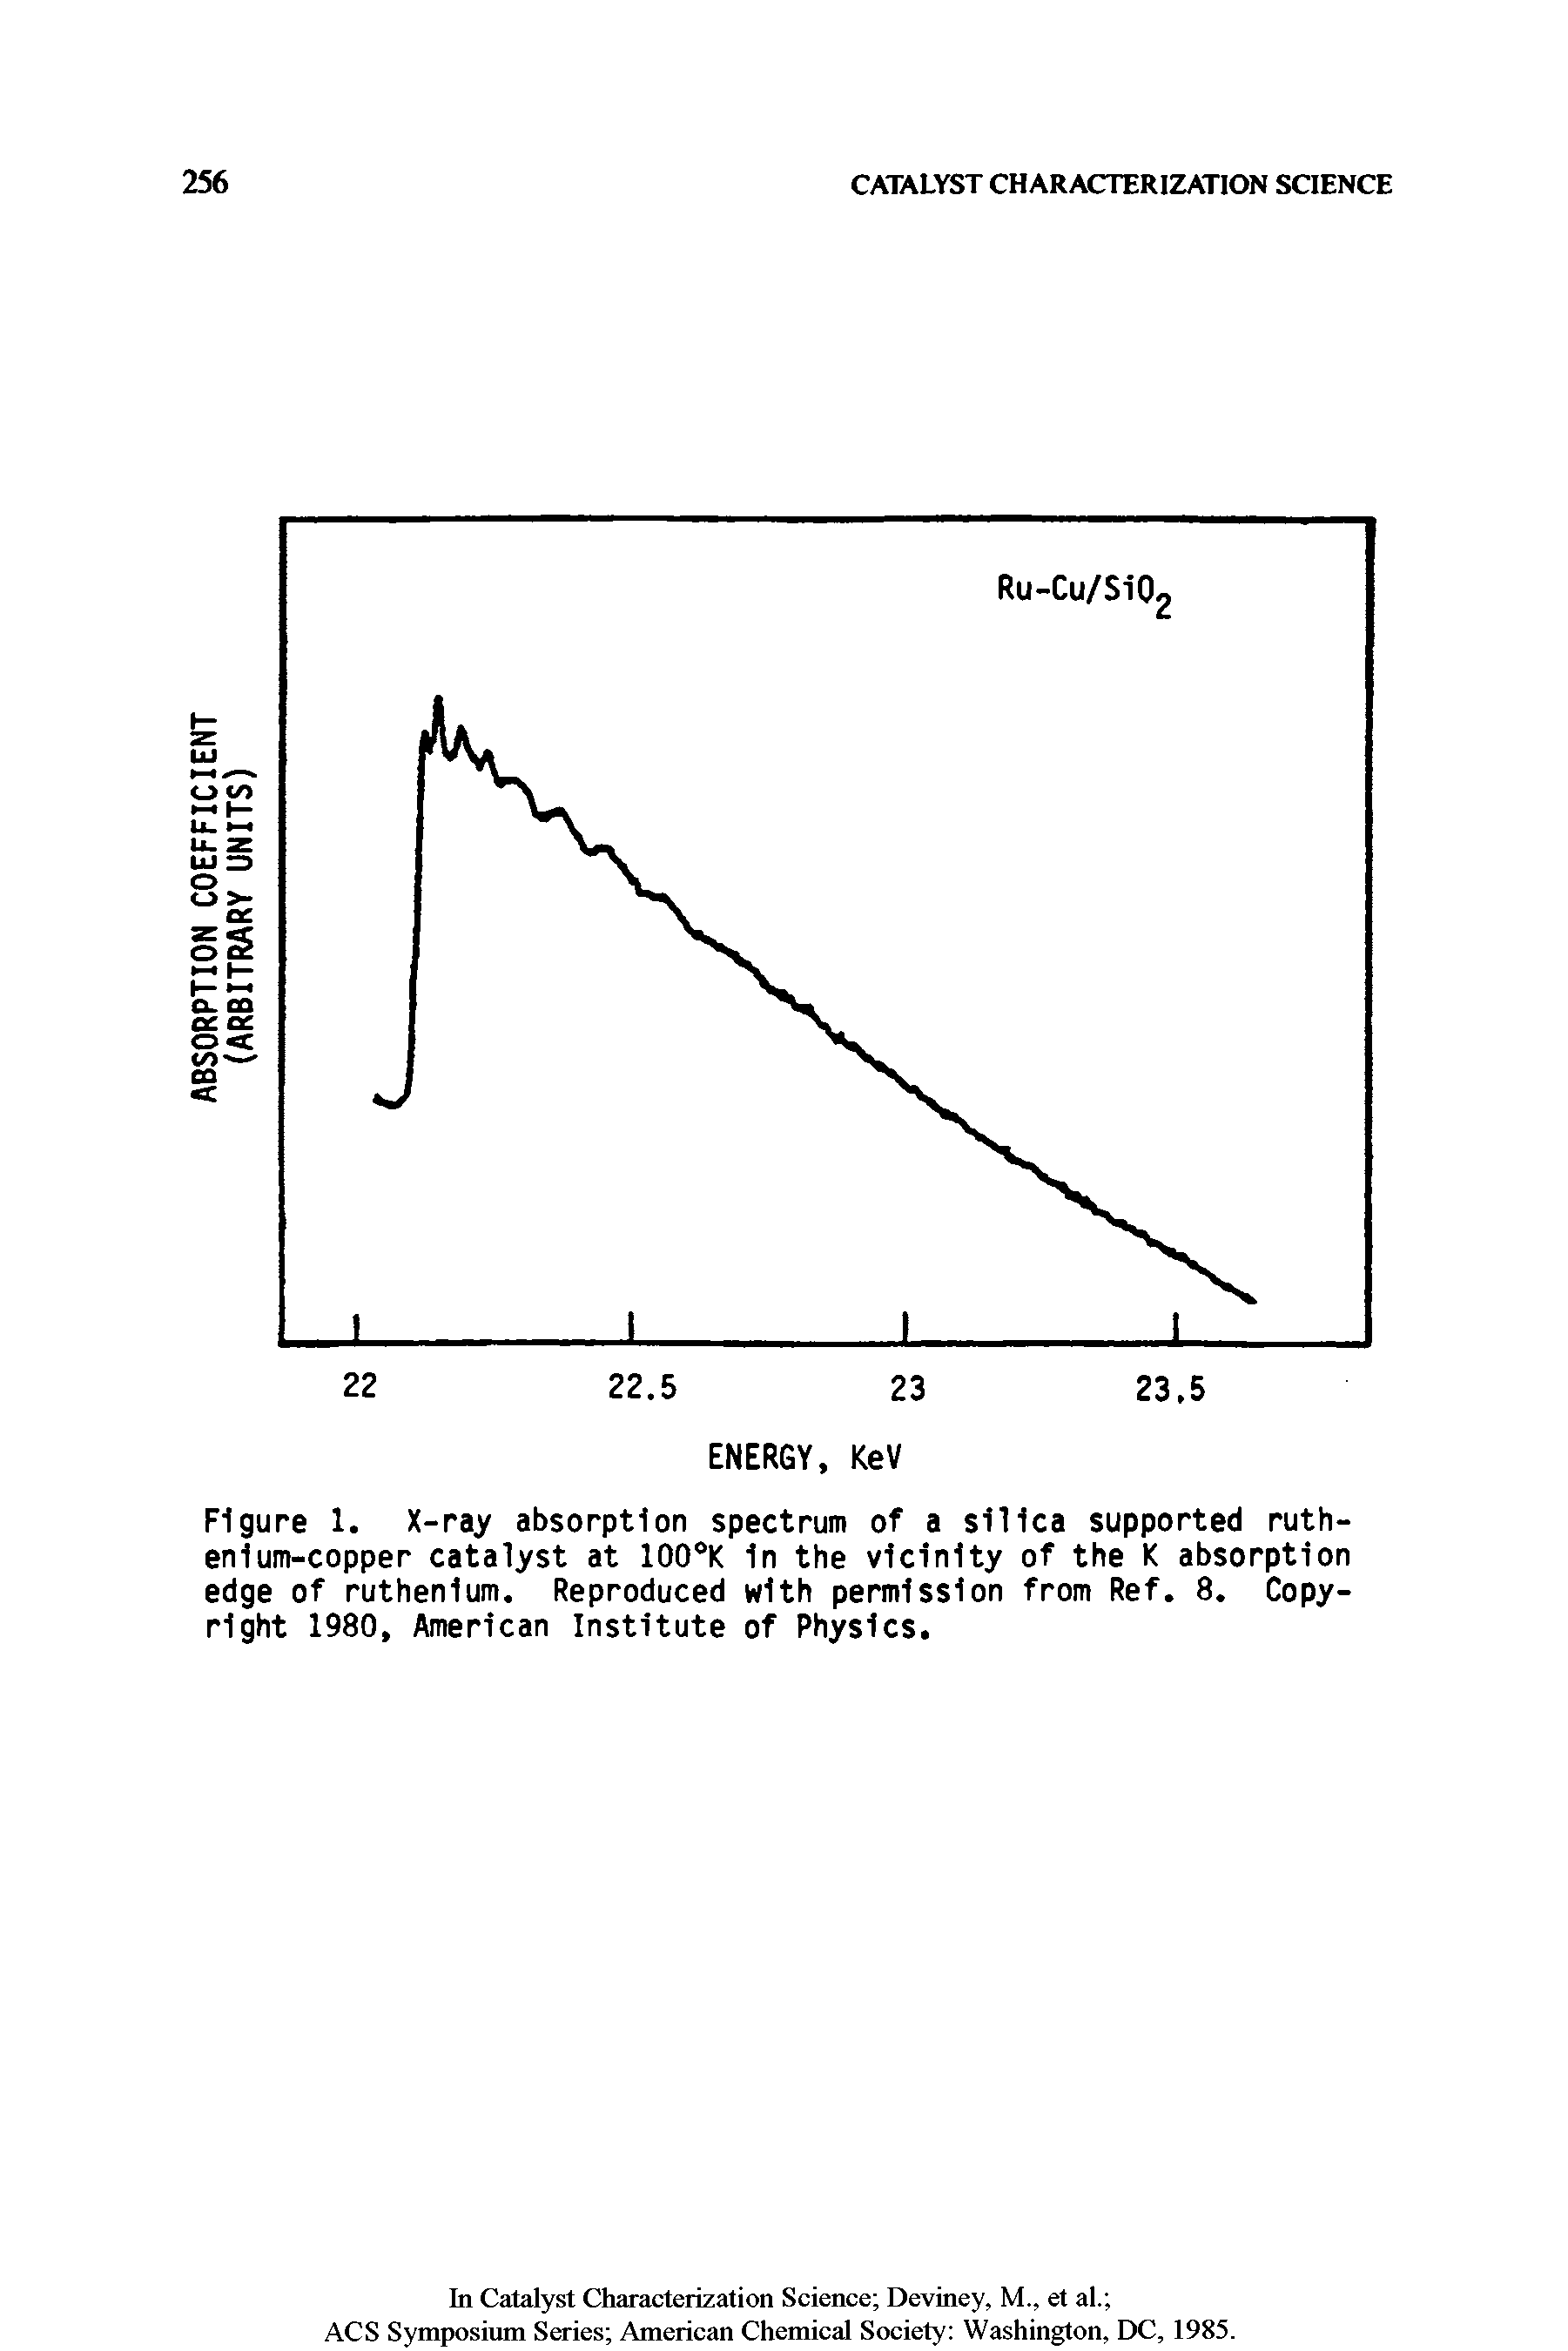 Figure 1. X-ray absorption spectrum of a silica supported ruthenium-copper catalyst at 100 K In the vicinity of the K absorption edge of ruthenium. Reproduced with permission from Ref. 8. Copyright 1980, American Institute of Physics.